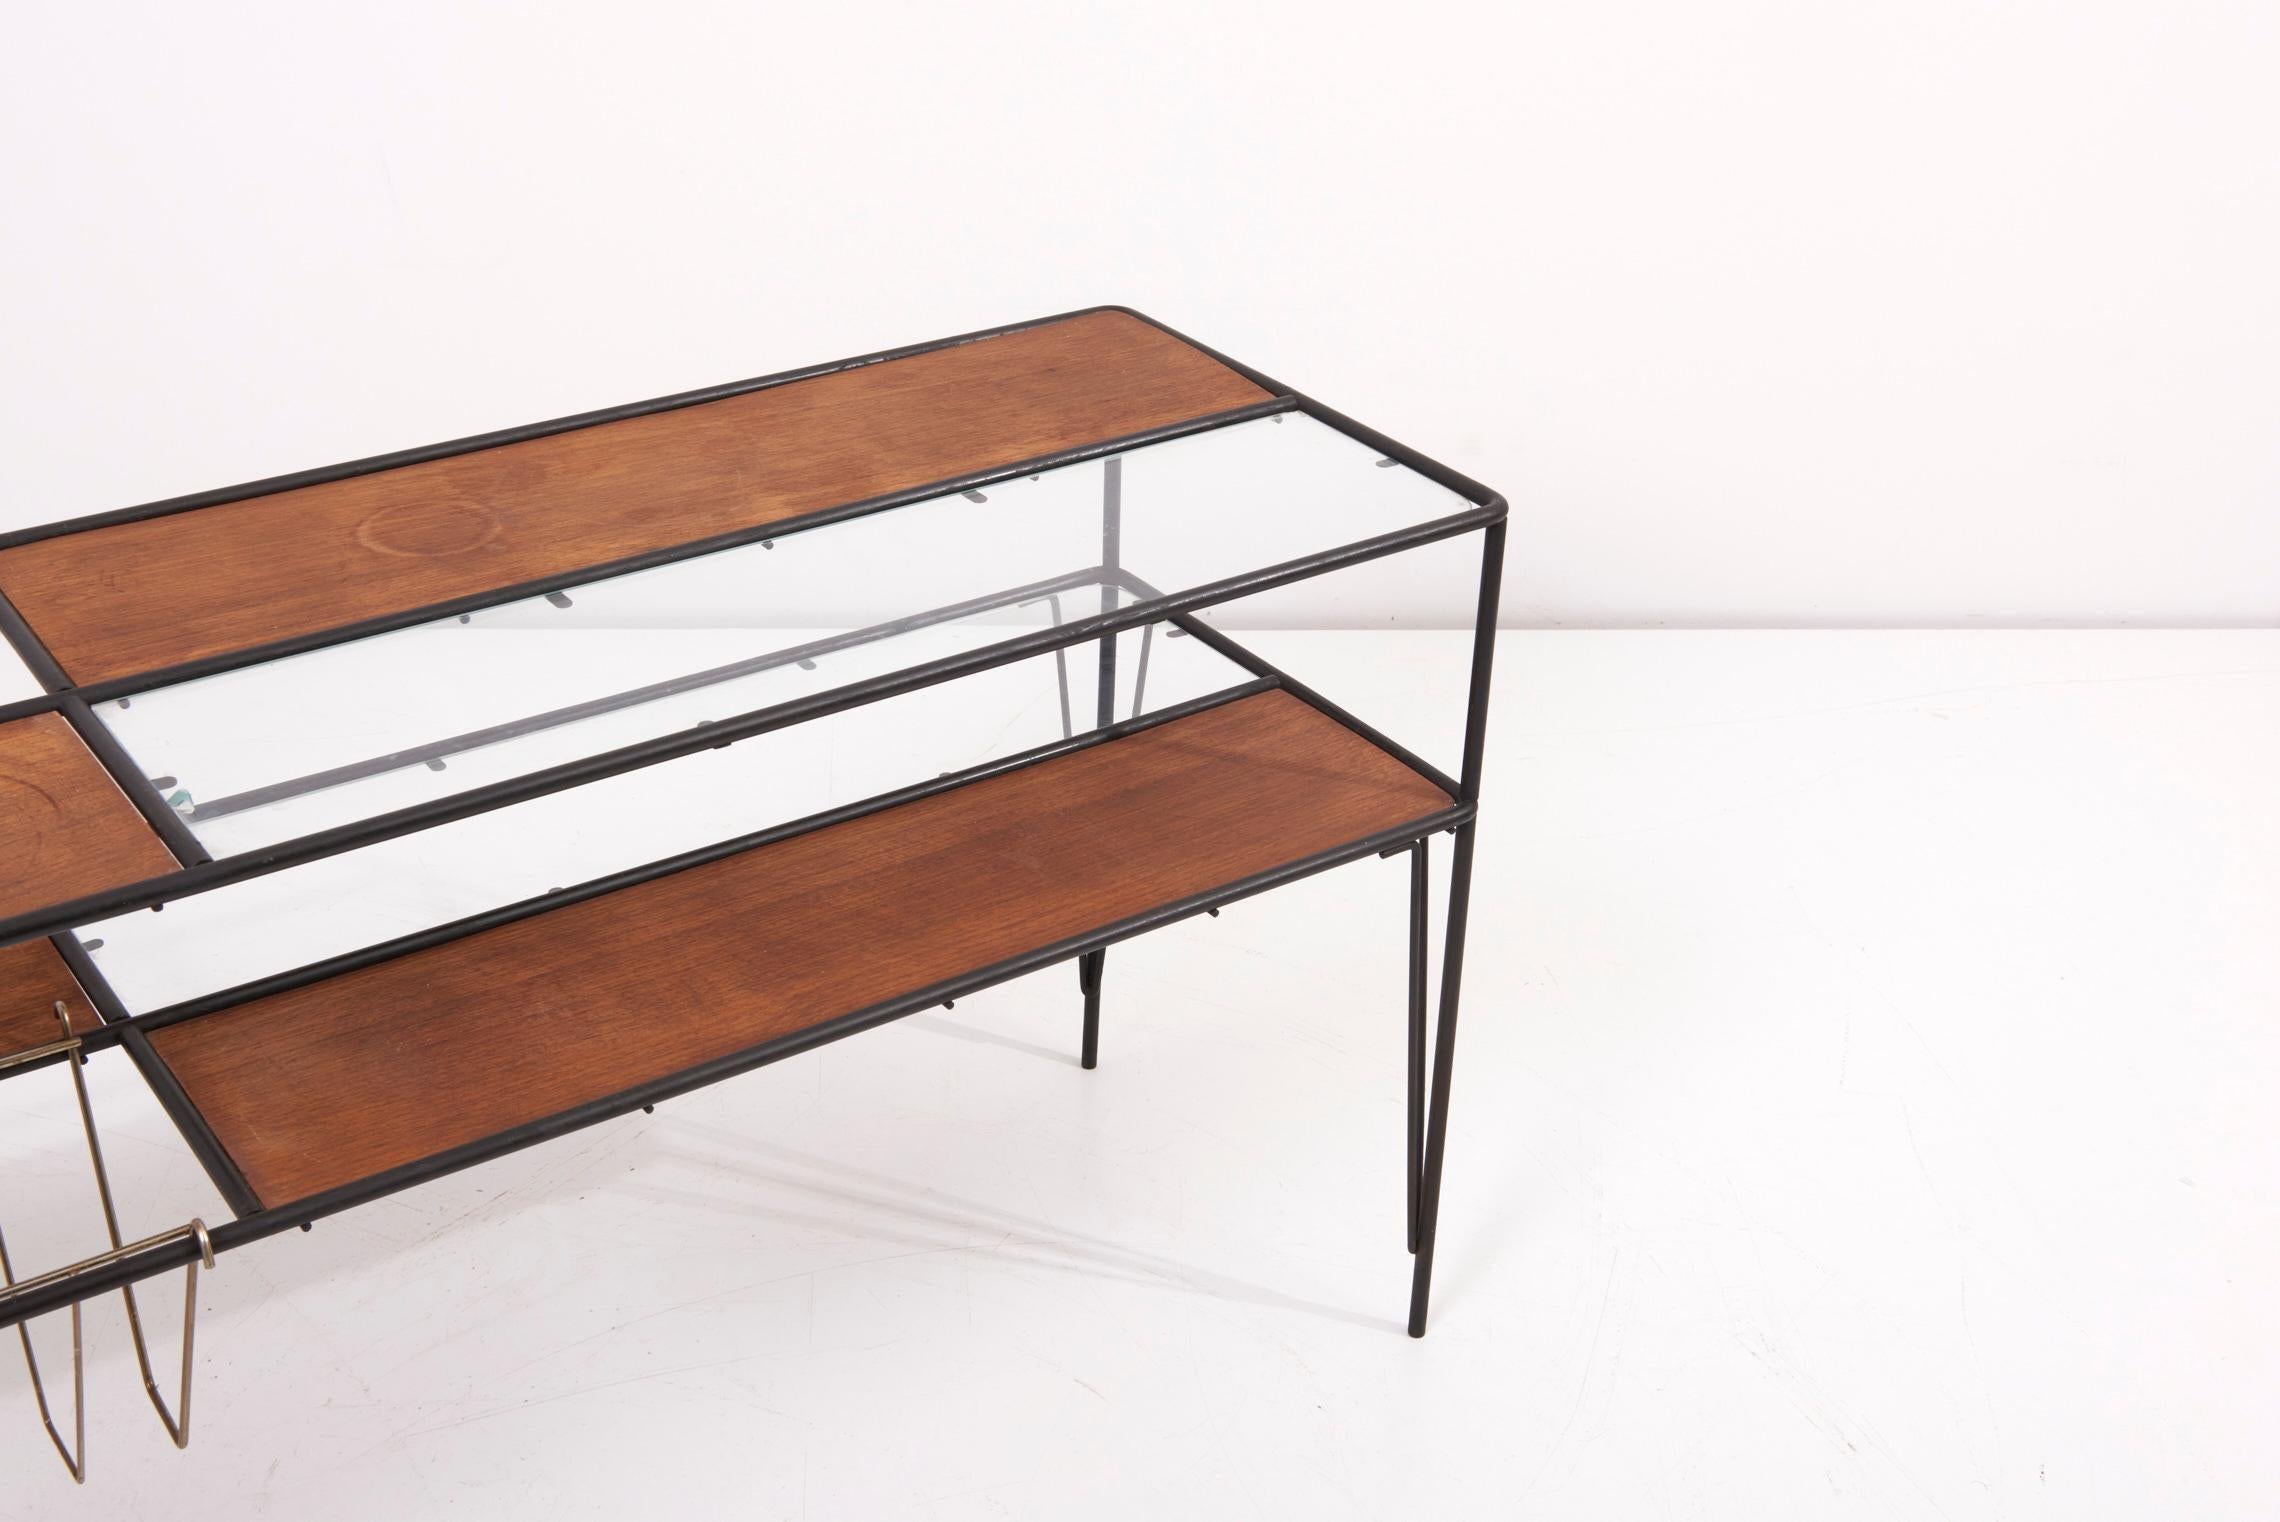 Modernist Magazine Rack or Side Coffee Table in Metal, Wood and Glass, US 1950s For Sale 3